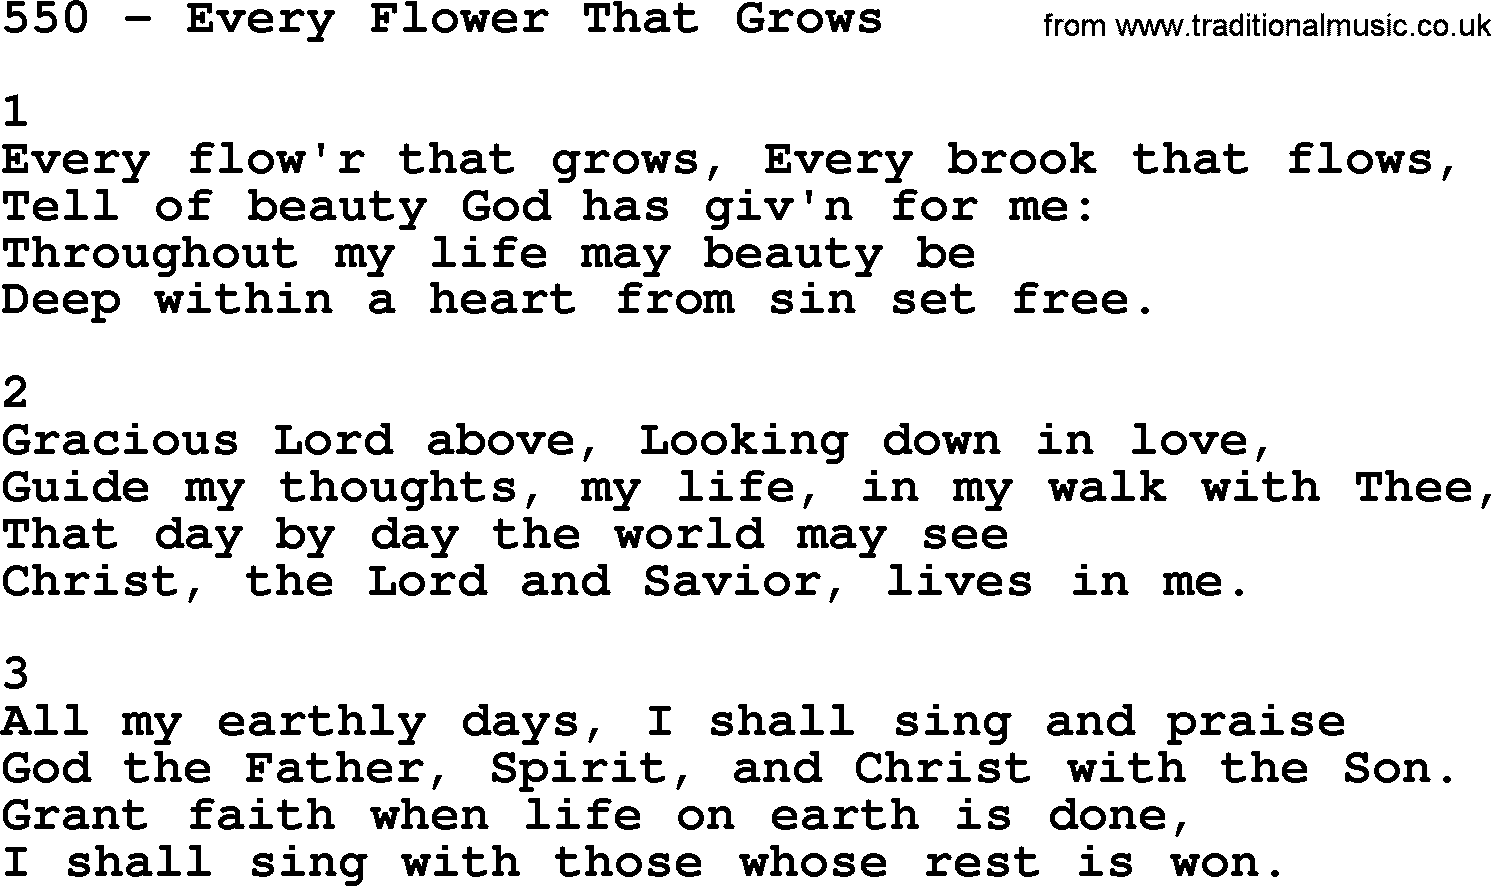 Complete Adventis Hymnal, title: 550-Every Flower That Grows, with lyrics, midi, mp3, powerpoints(PPT) and PDF,